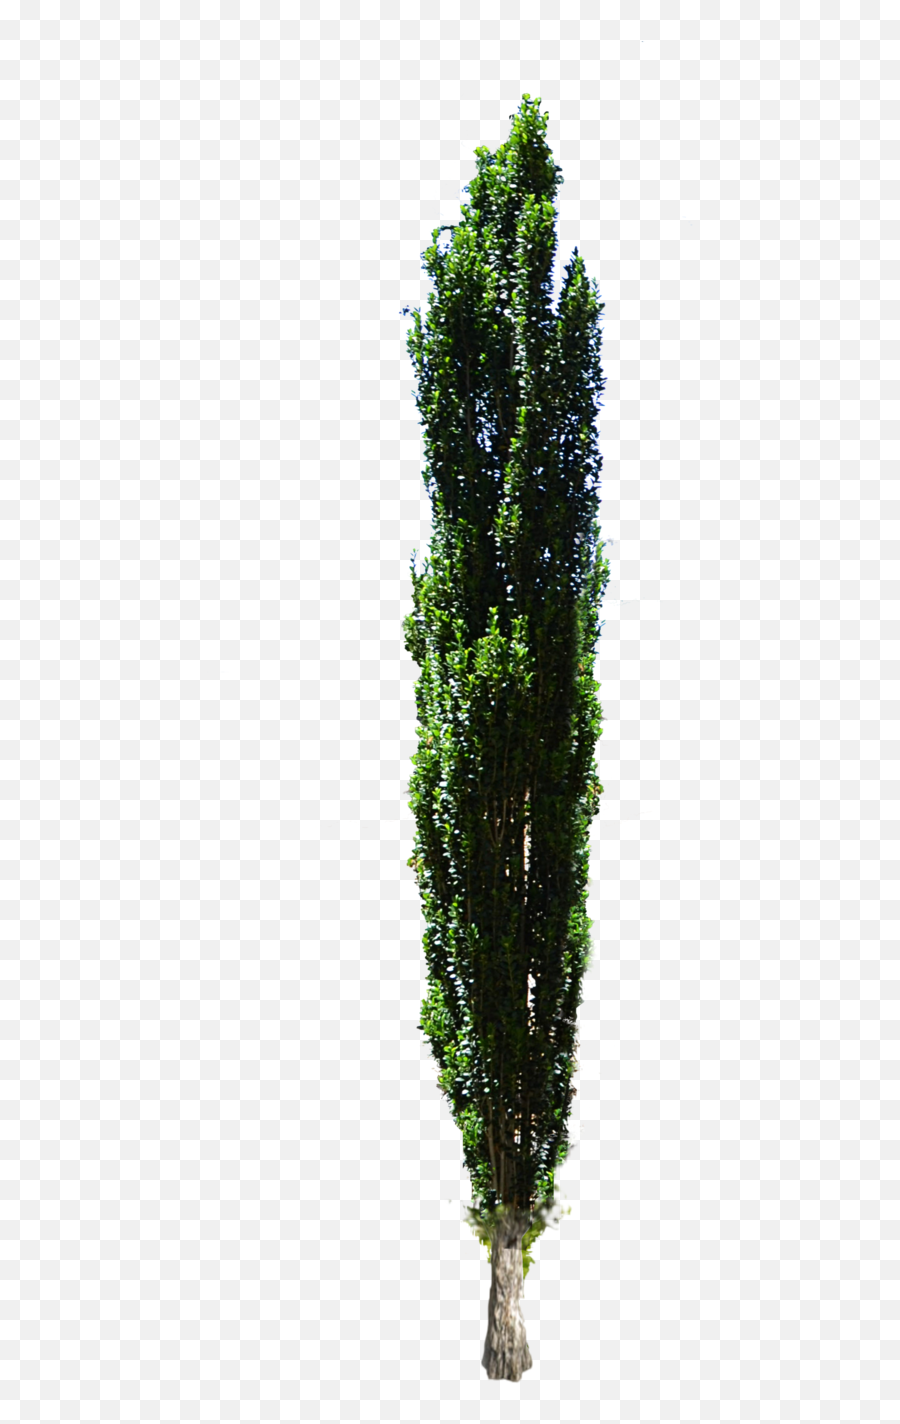 Cypress Tree Transparent Png Clipart - Cypress Tree Cut Out,Cypress Tree Png